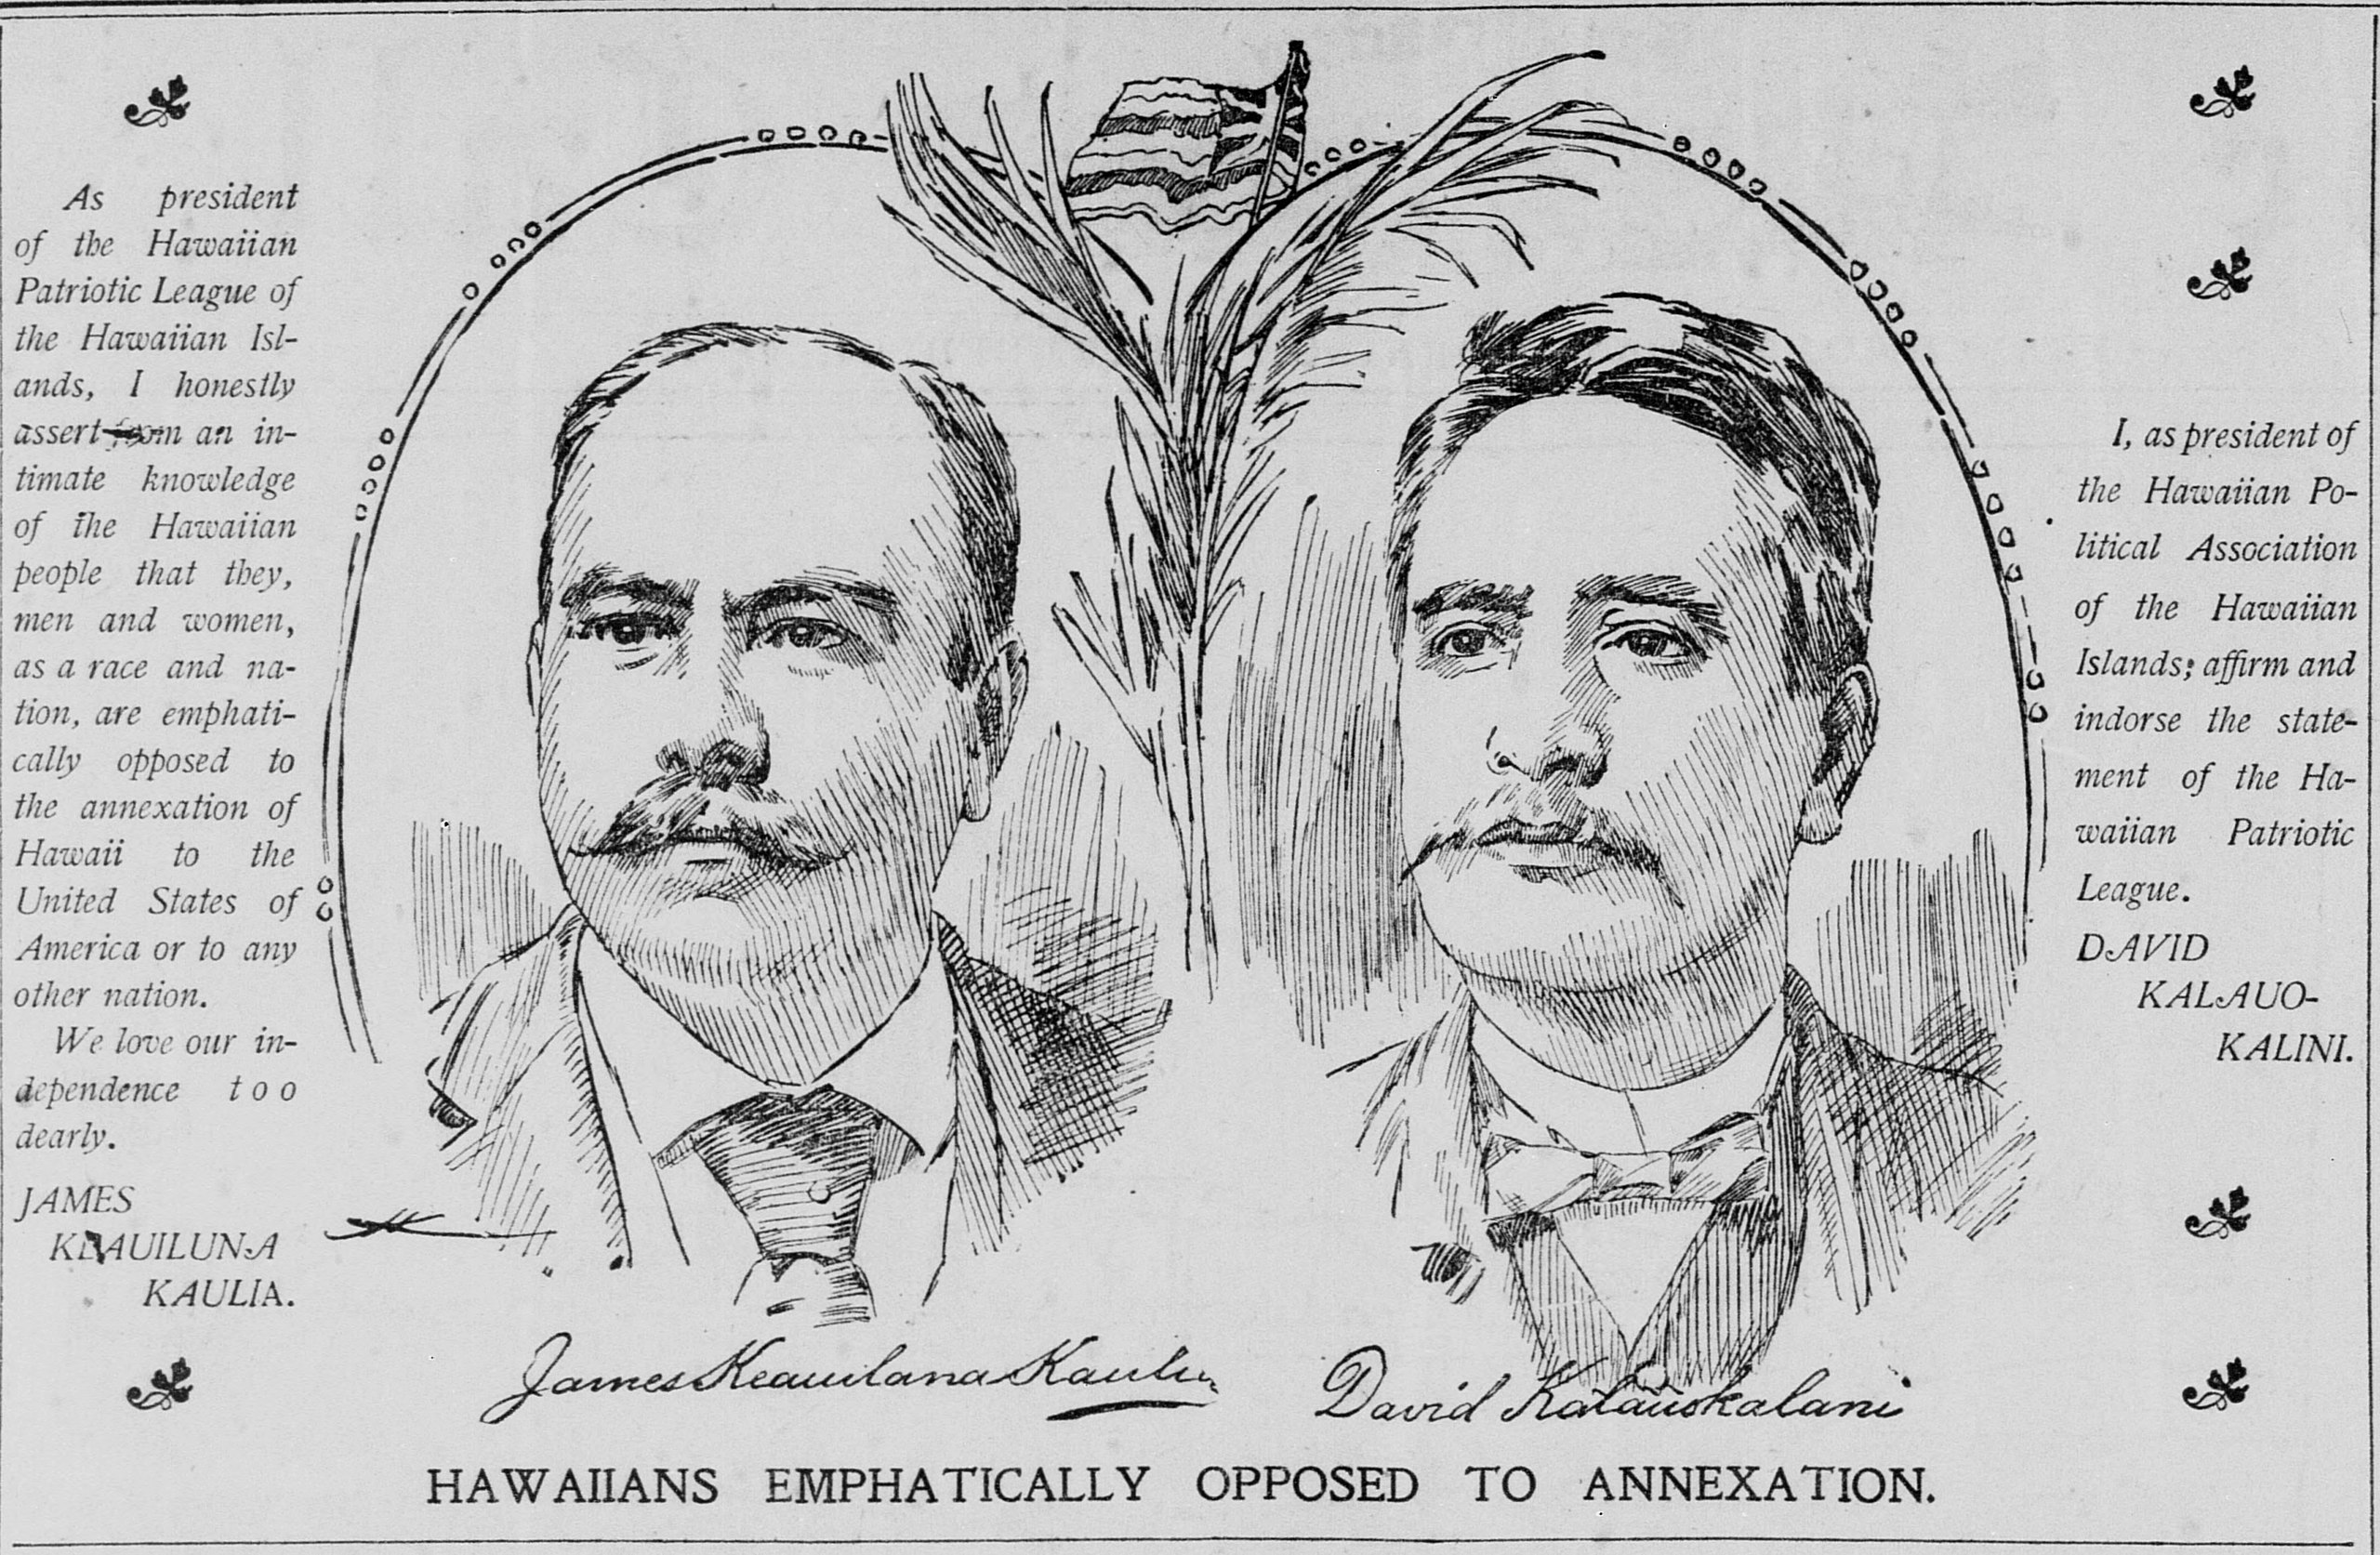 File:Hawaiians Emphatically Opposed to Annexation, 1897.jpg - Wikipedia